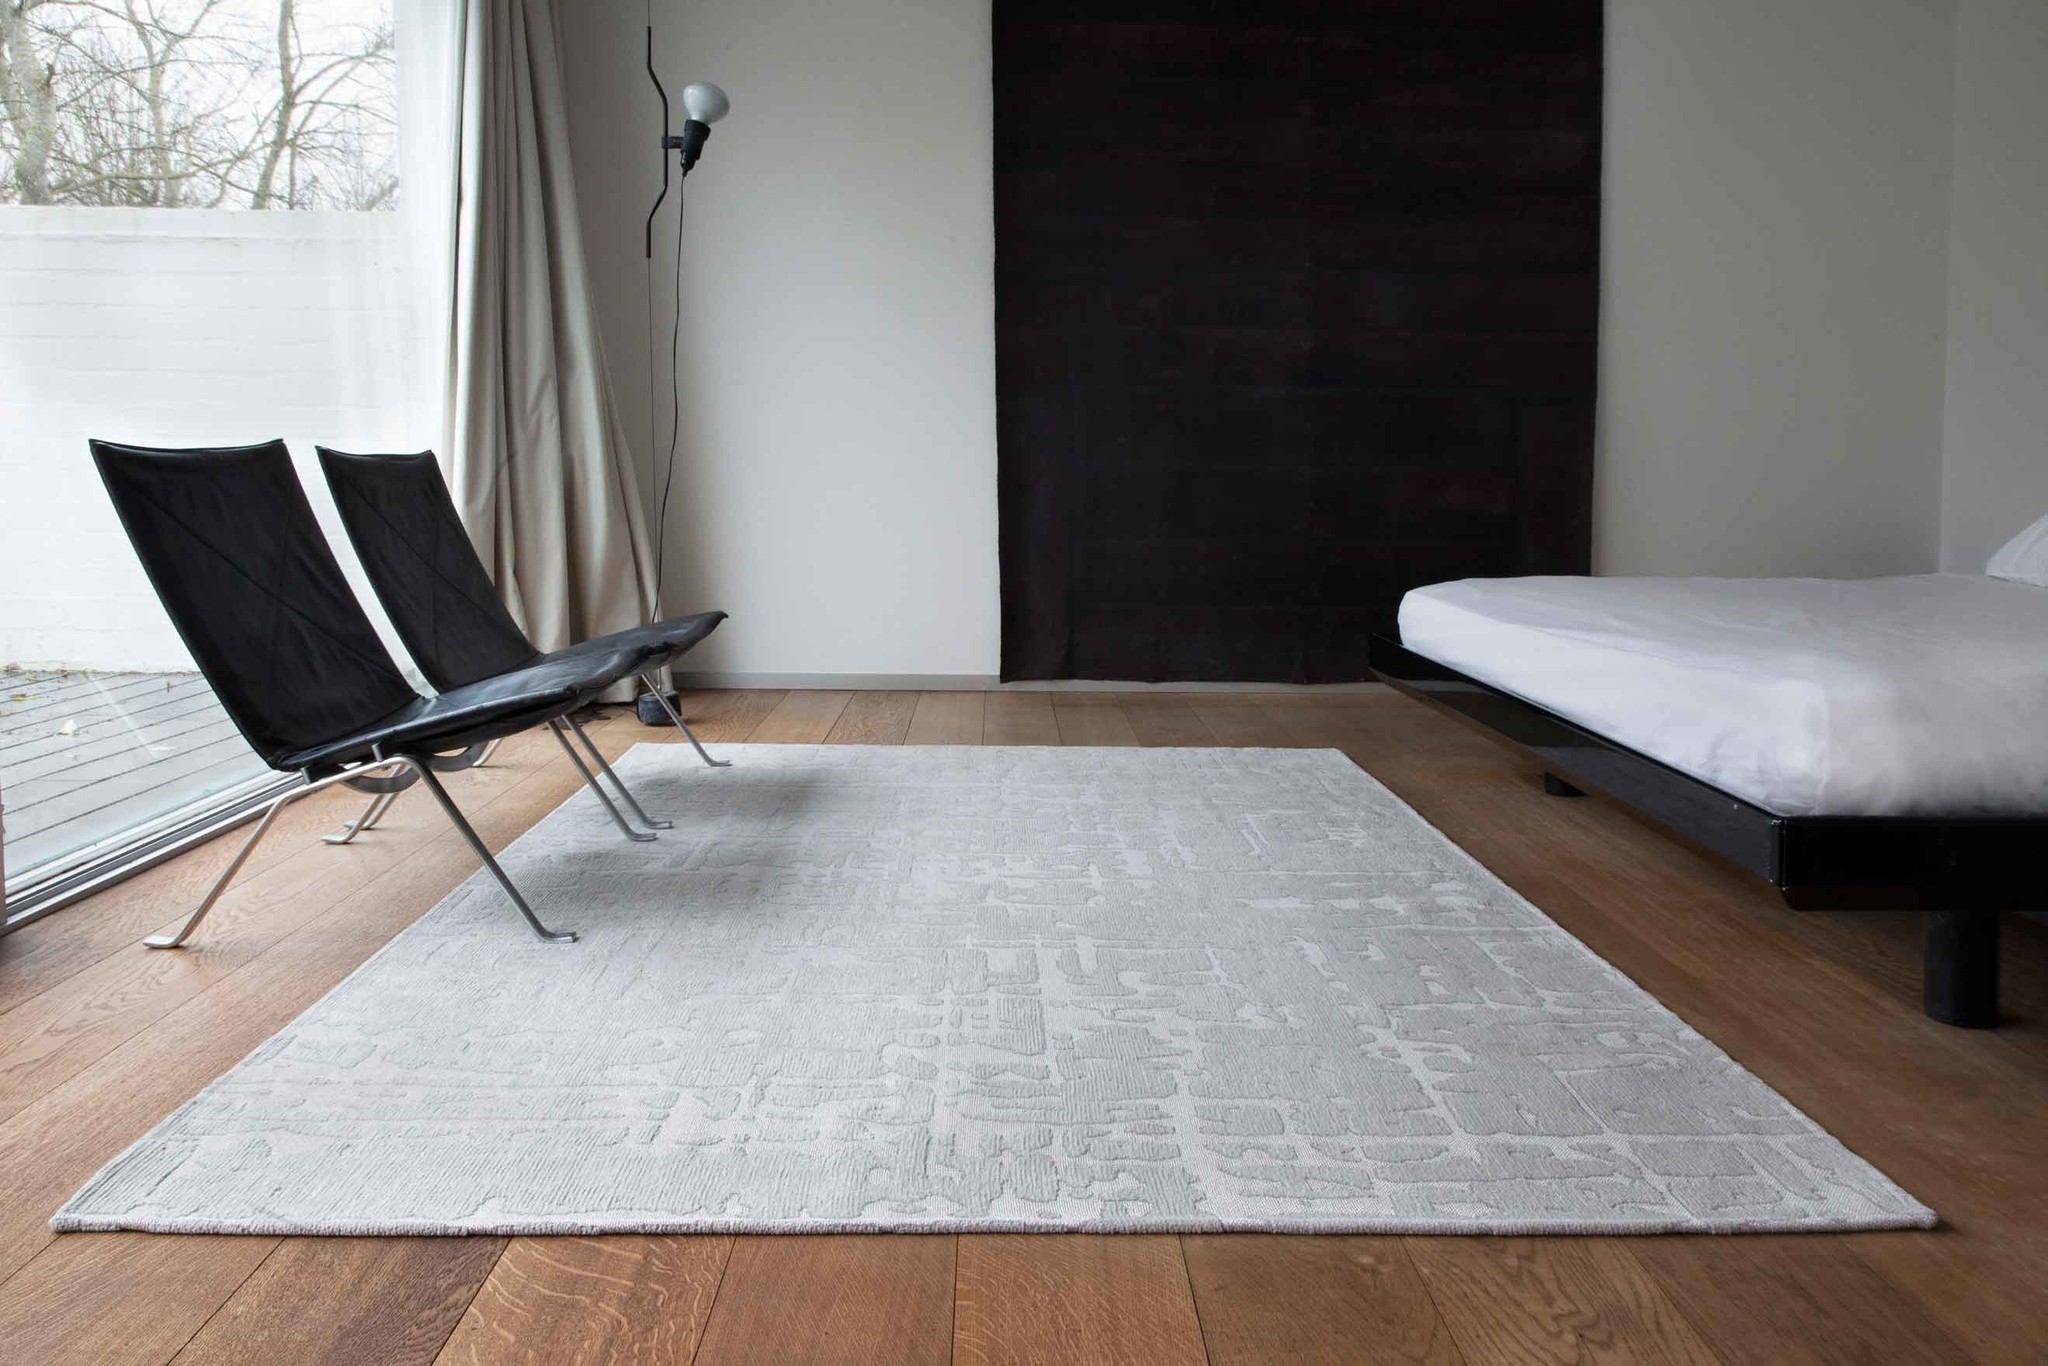 Silver Belgian Flatwoven Rug ☞ Size: 140 x 200 cm